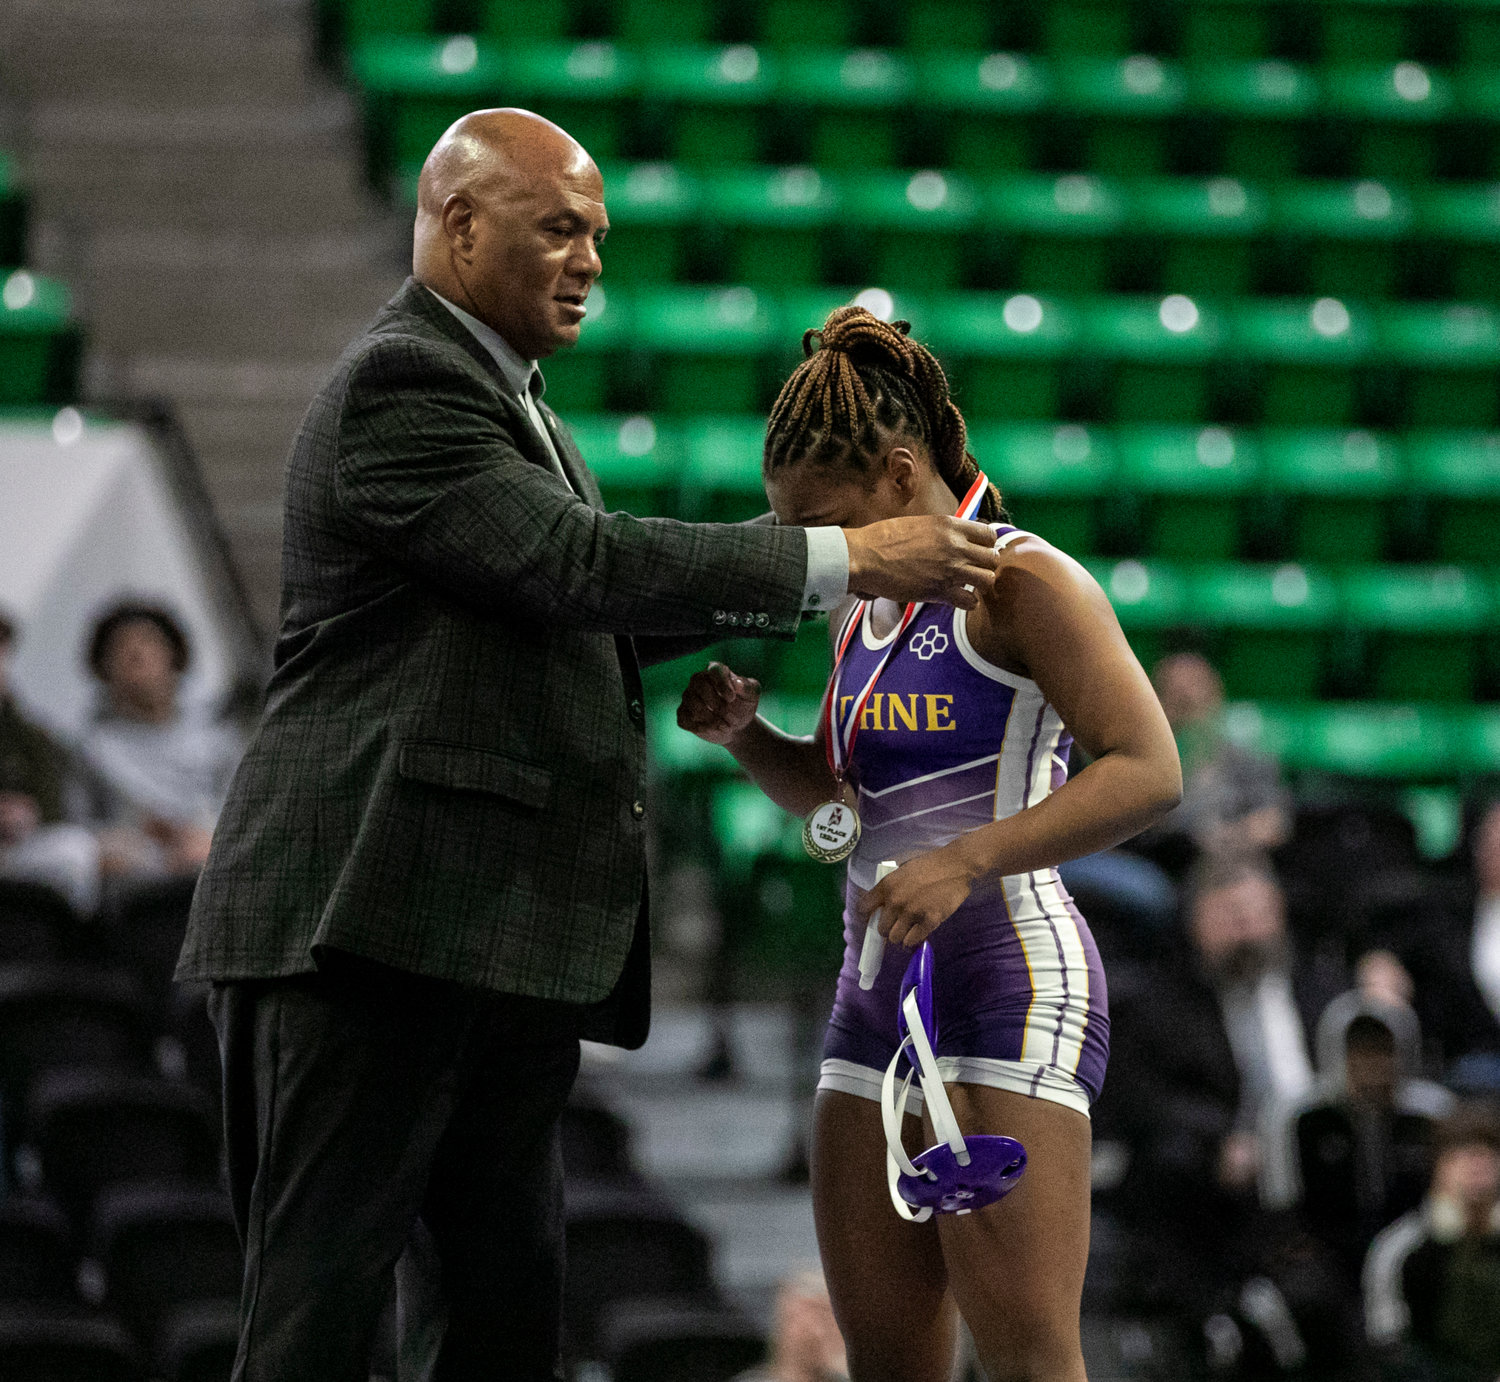 Kalyse Hill is crowned the 132-pound state champion by AHSAA Executive Director Alvin Briggs Friday afternoon at Bill Harris Arena in Birmingham after she won her match by decision over Tuscaloosa County’s Raya Carpenter.